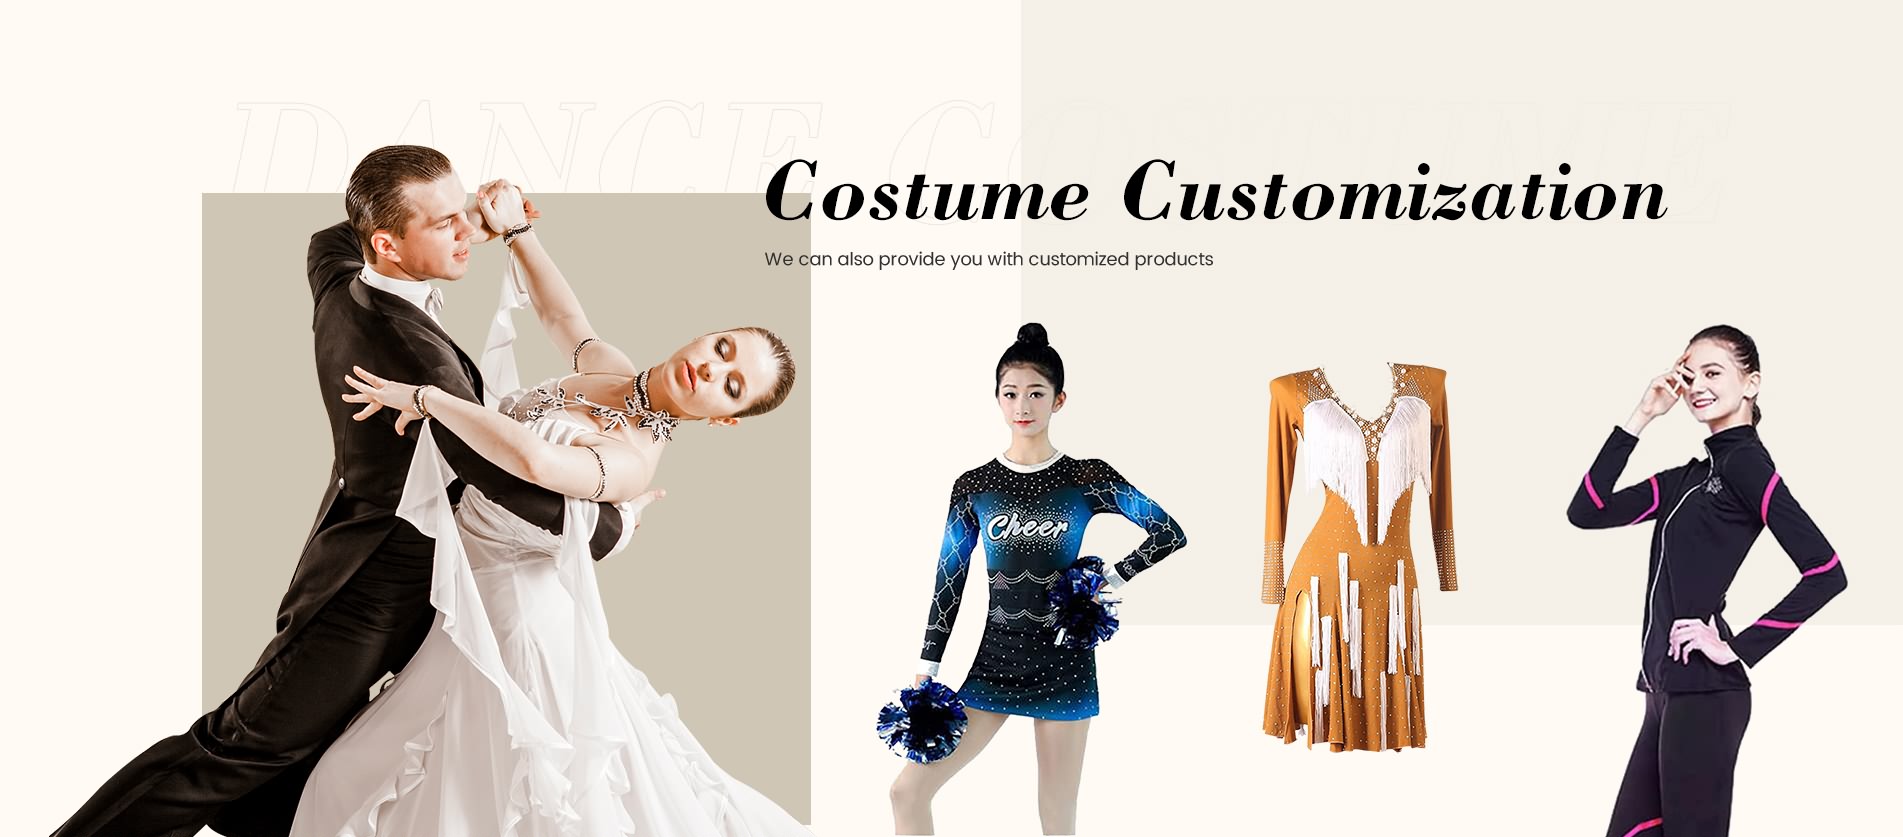 Gym Outfit, Ice Skating Costume, Court Style Dress - LIUHUO